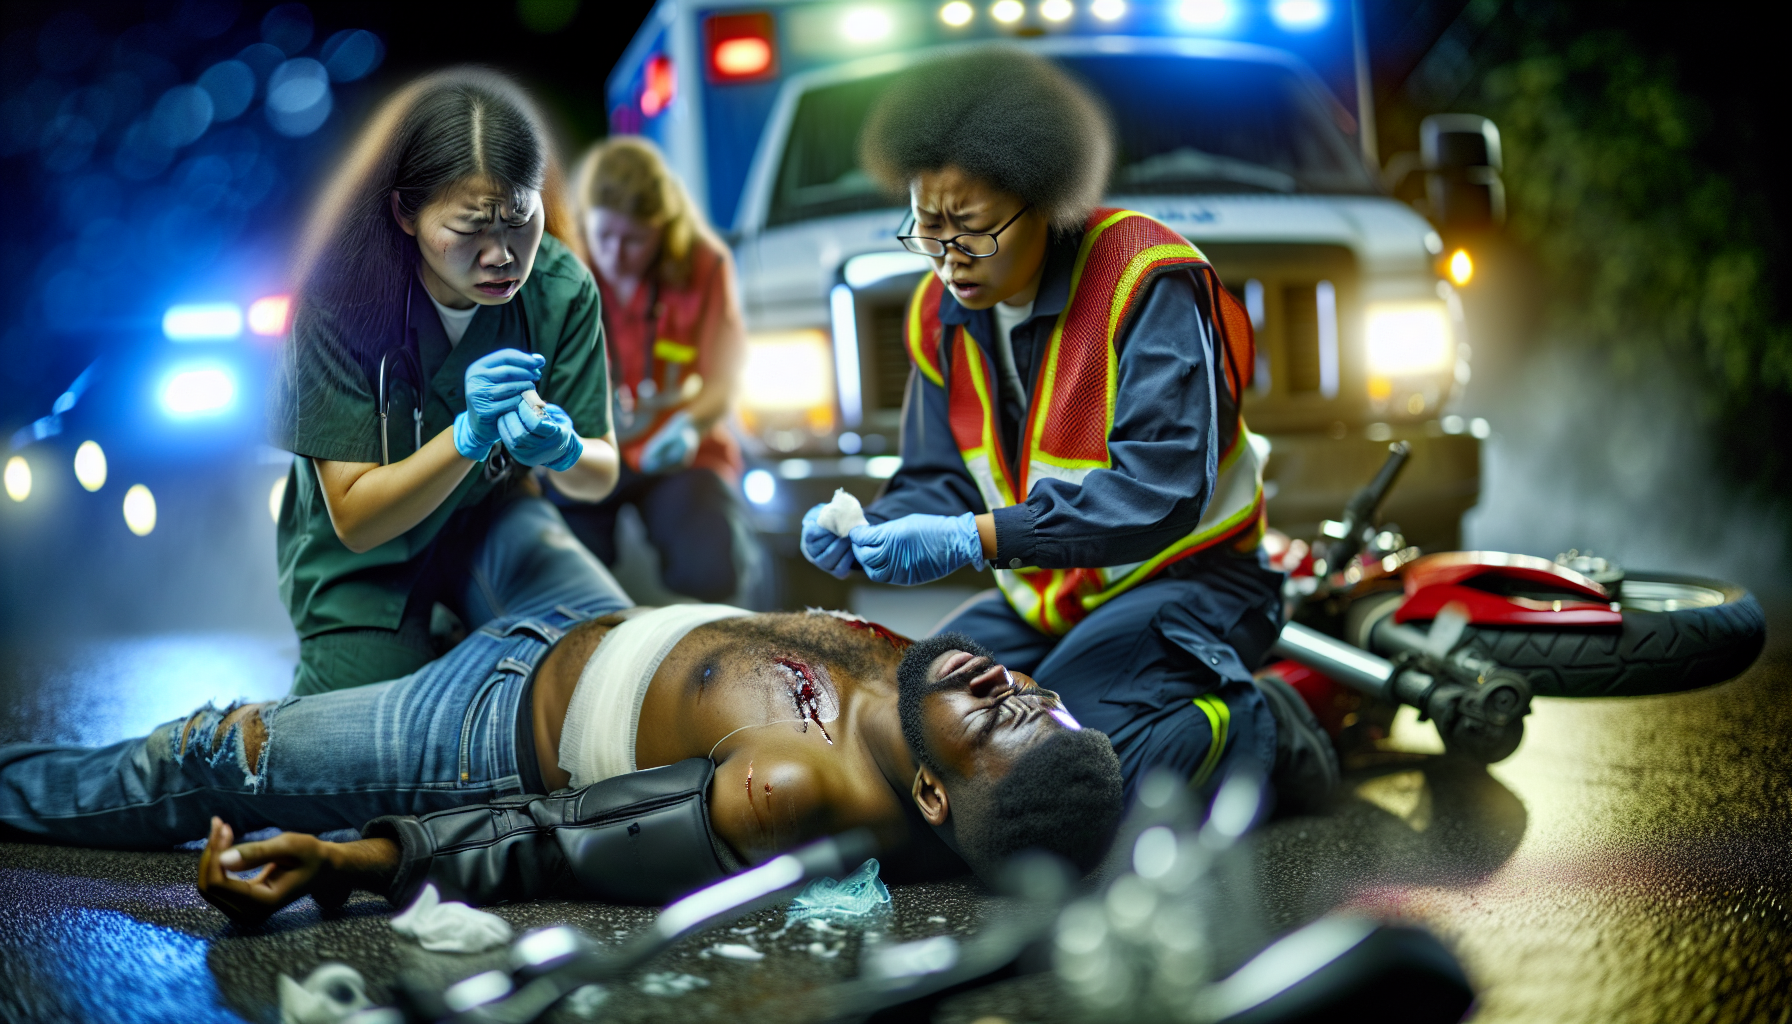 Motorcycle accident victim receiving medical attention